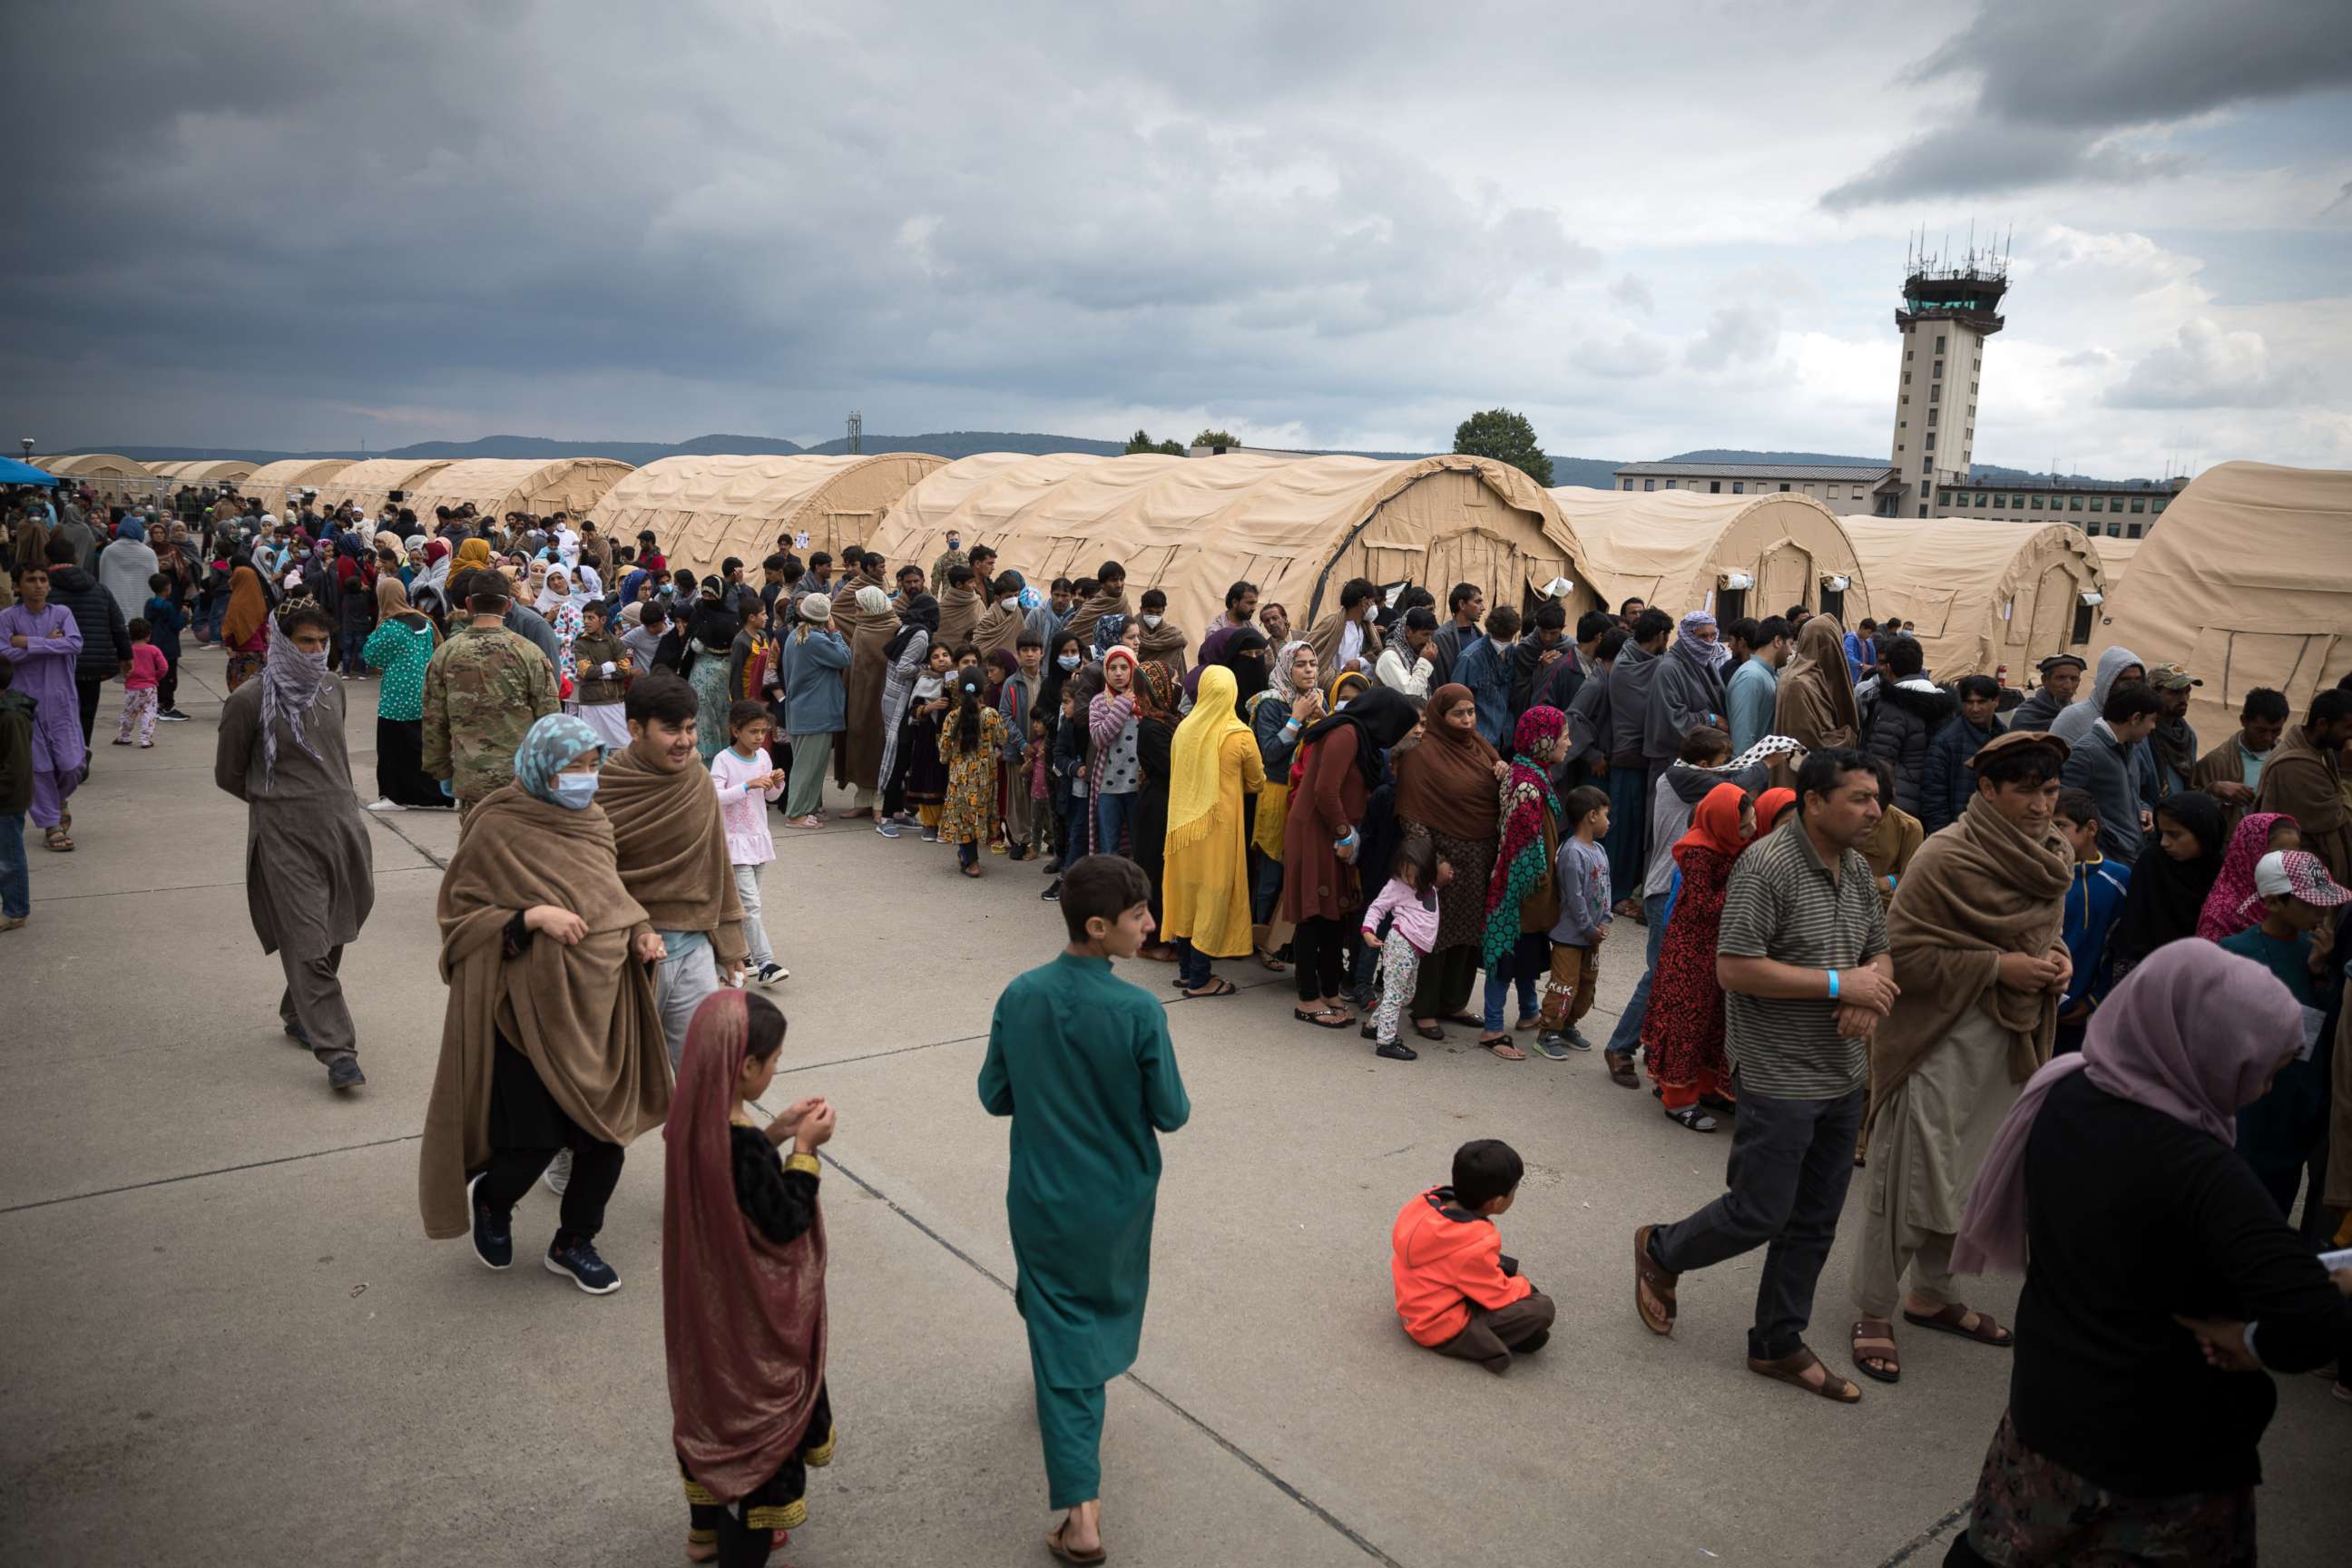 PHOTO: People evacuated from Afghanistan line up for food at Ramstein Air Base in the German state of Rhineland-Palatinate on Aug. 30, 2021.